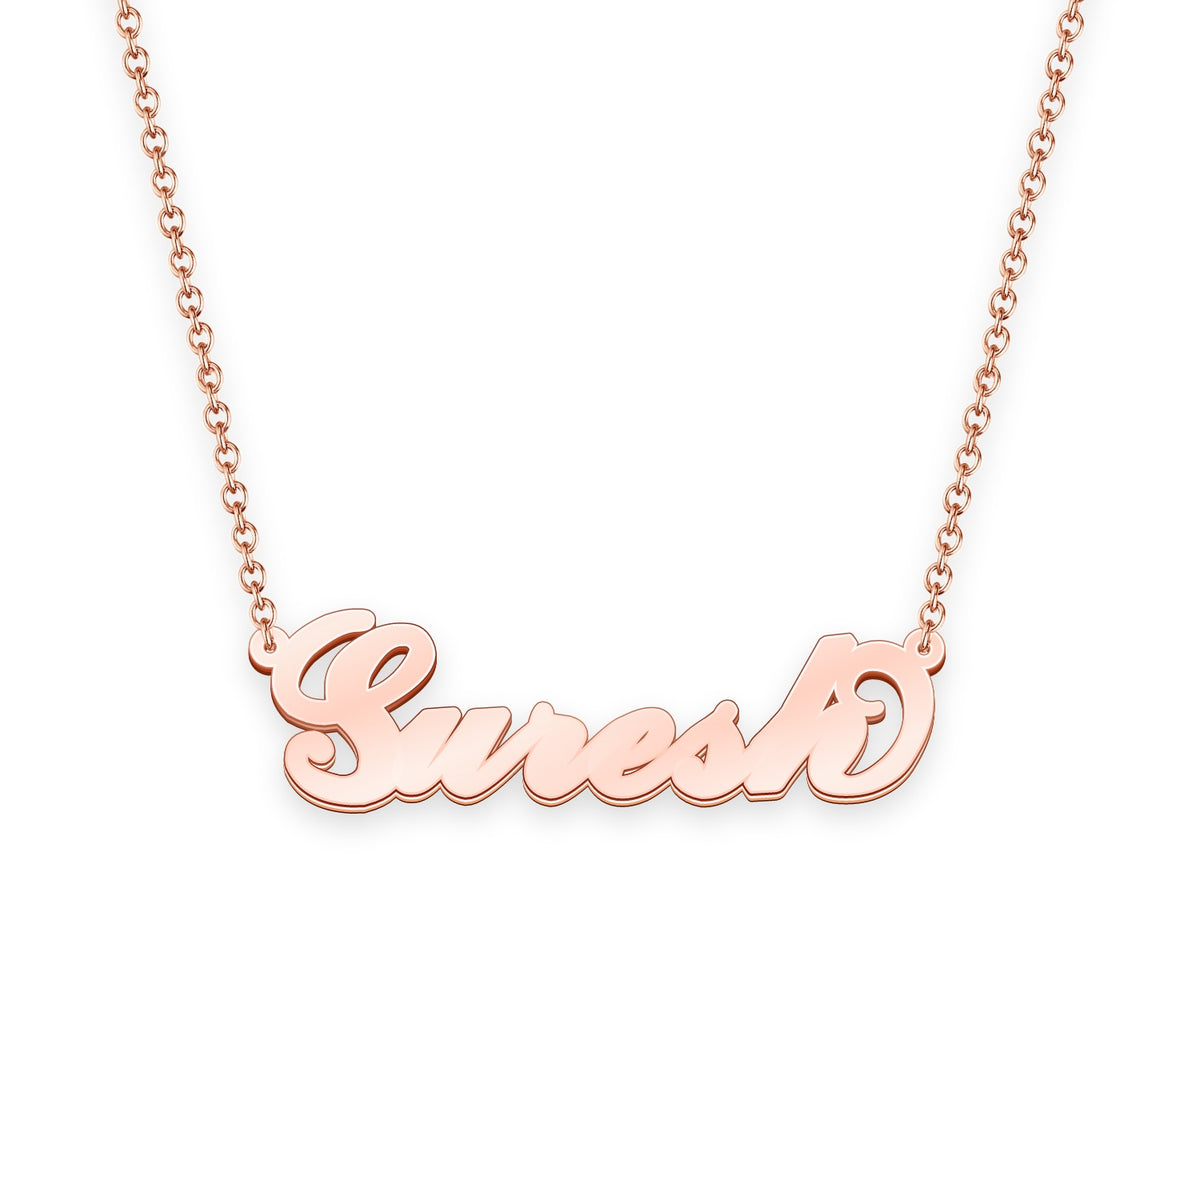 Suresh name necklace Gold Custom Necklace, Personalized Gifts For ...